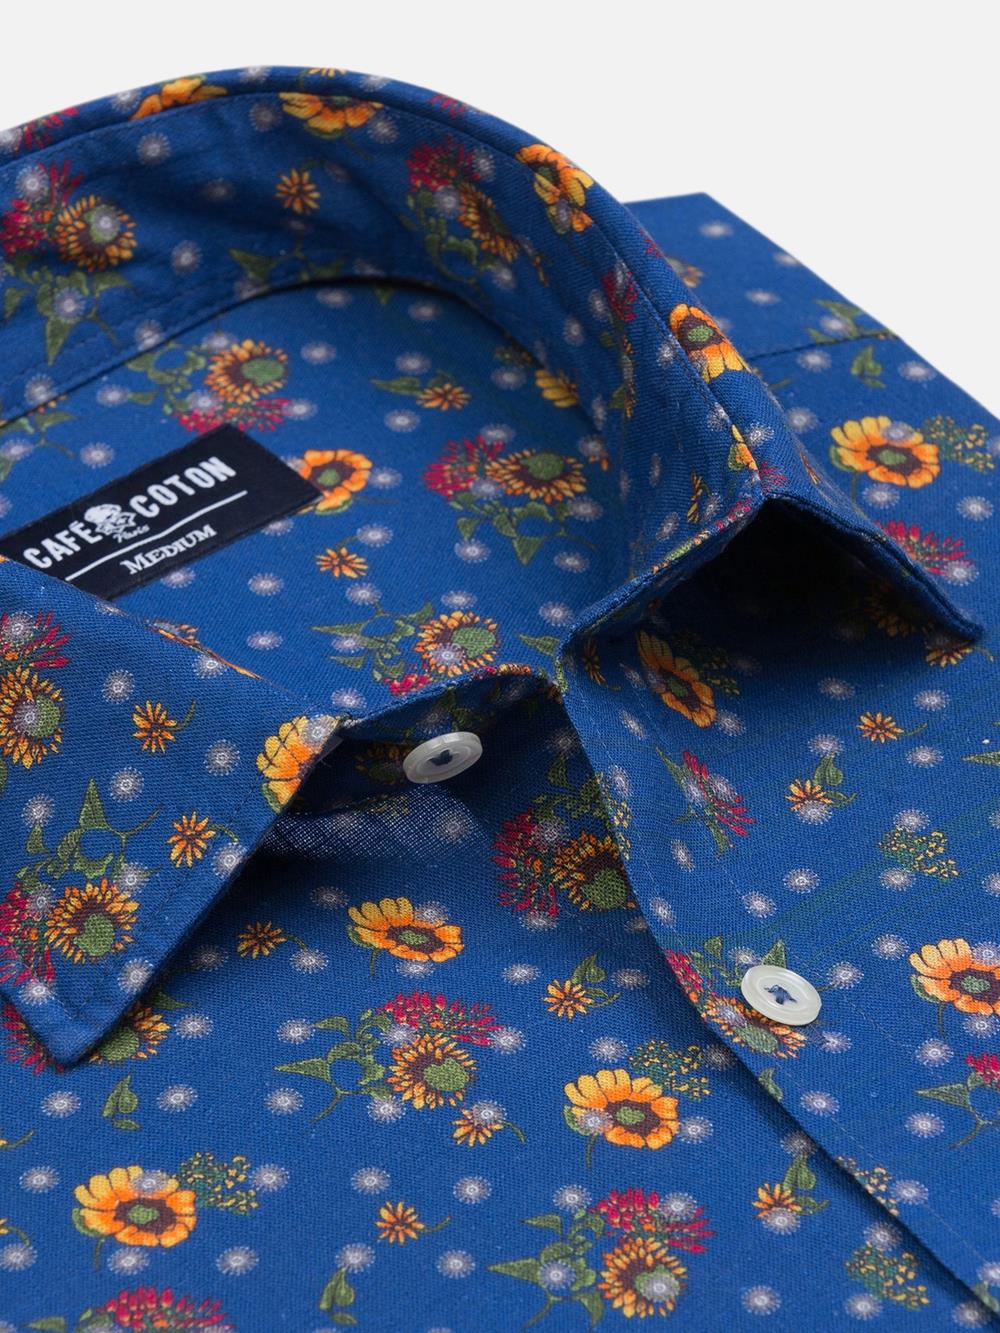 Keith shirt in linen with floral pattern